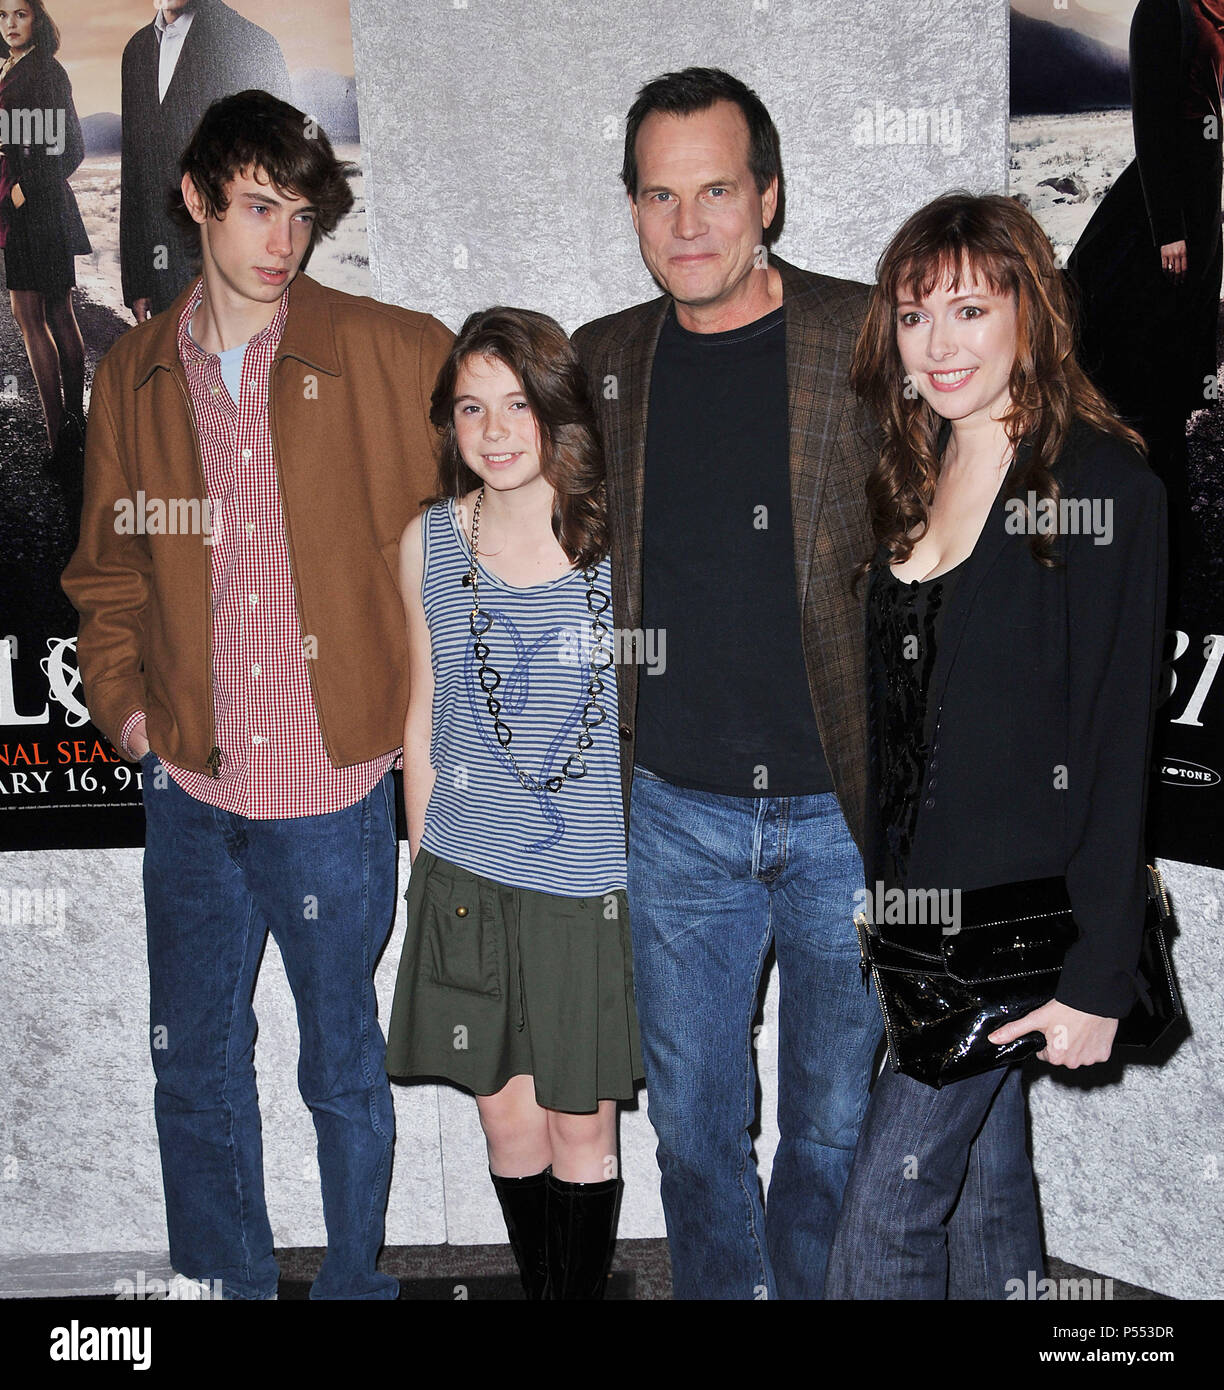 Bill Paxton, wife, kids  -  Big Love Premiere at the DGA in Los Angeles.a  Bill Paxton, wife, kids 10 ------------- Red Carpet Event, Vertical, USA, Film Industry, Celebrities,  Photography, Bestof, Arts Culture and Entertainment, Topix Celebrities fashion /  Vertical, Best of, Event in Hollywood Life - California,  Red Carpet and backstage, USA, Film Industry, Celebrities,  movie celebrities, TV celebrities, Music celebrities, Photography, Bestof, Arts Culture and Entertainment,  Topix, vertical,  family from from the year , 2011, inquiry tsuni@Gamma-USA.com Husband and wife Stock Photo